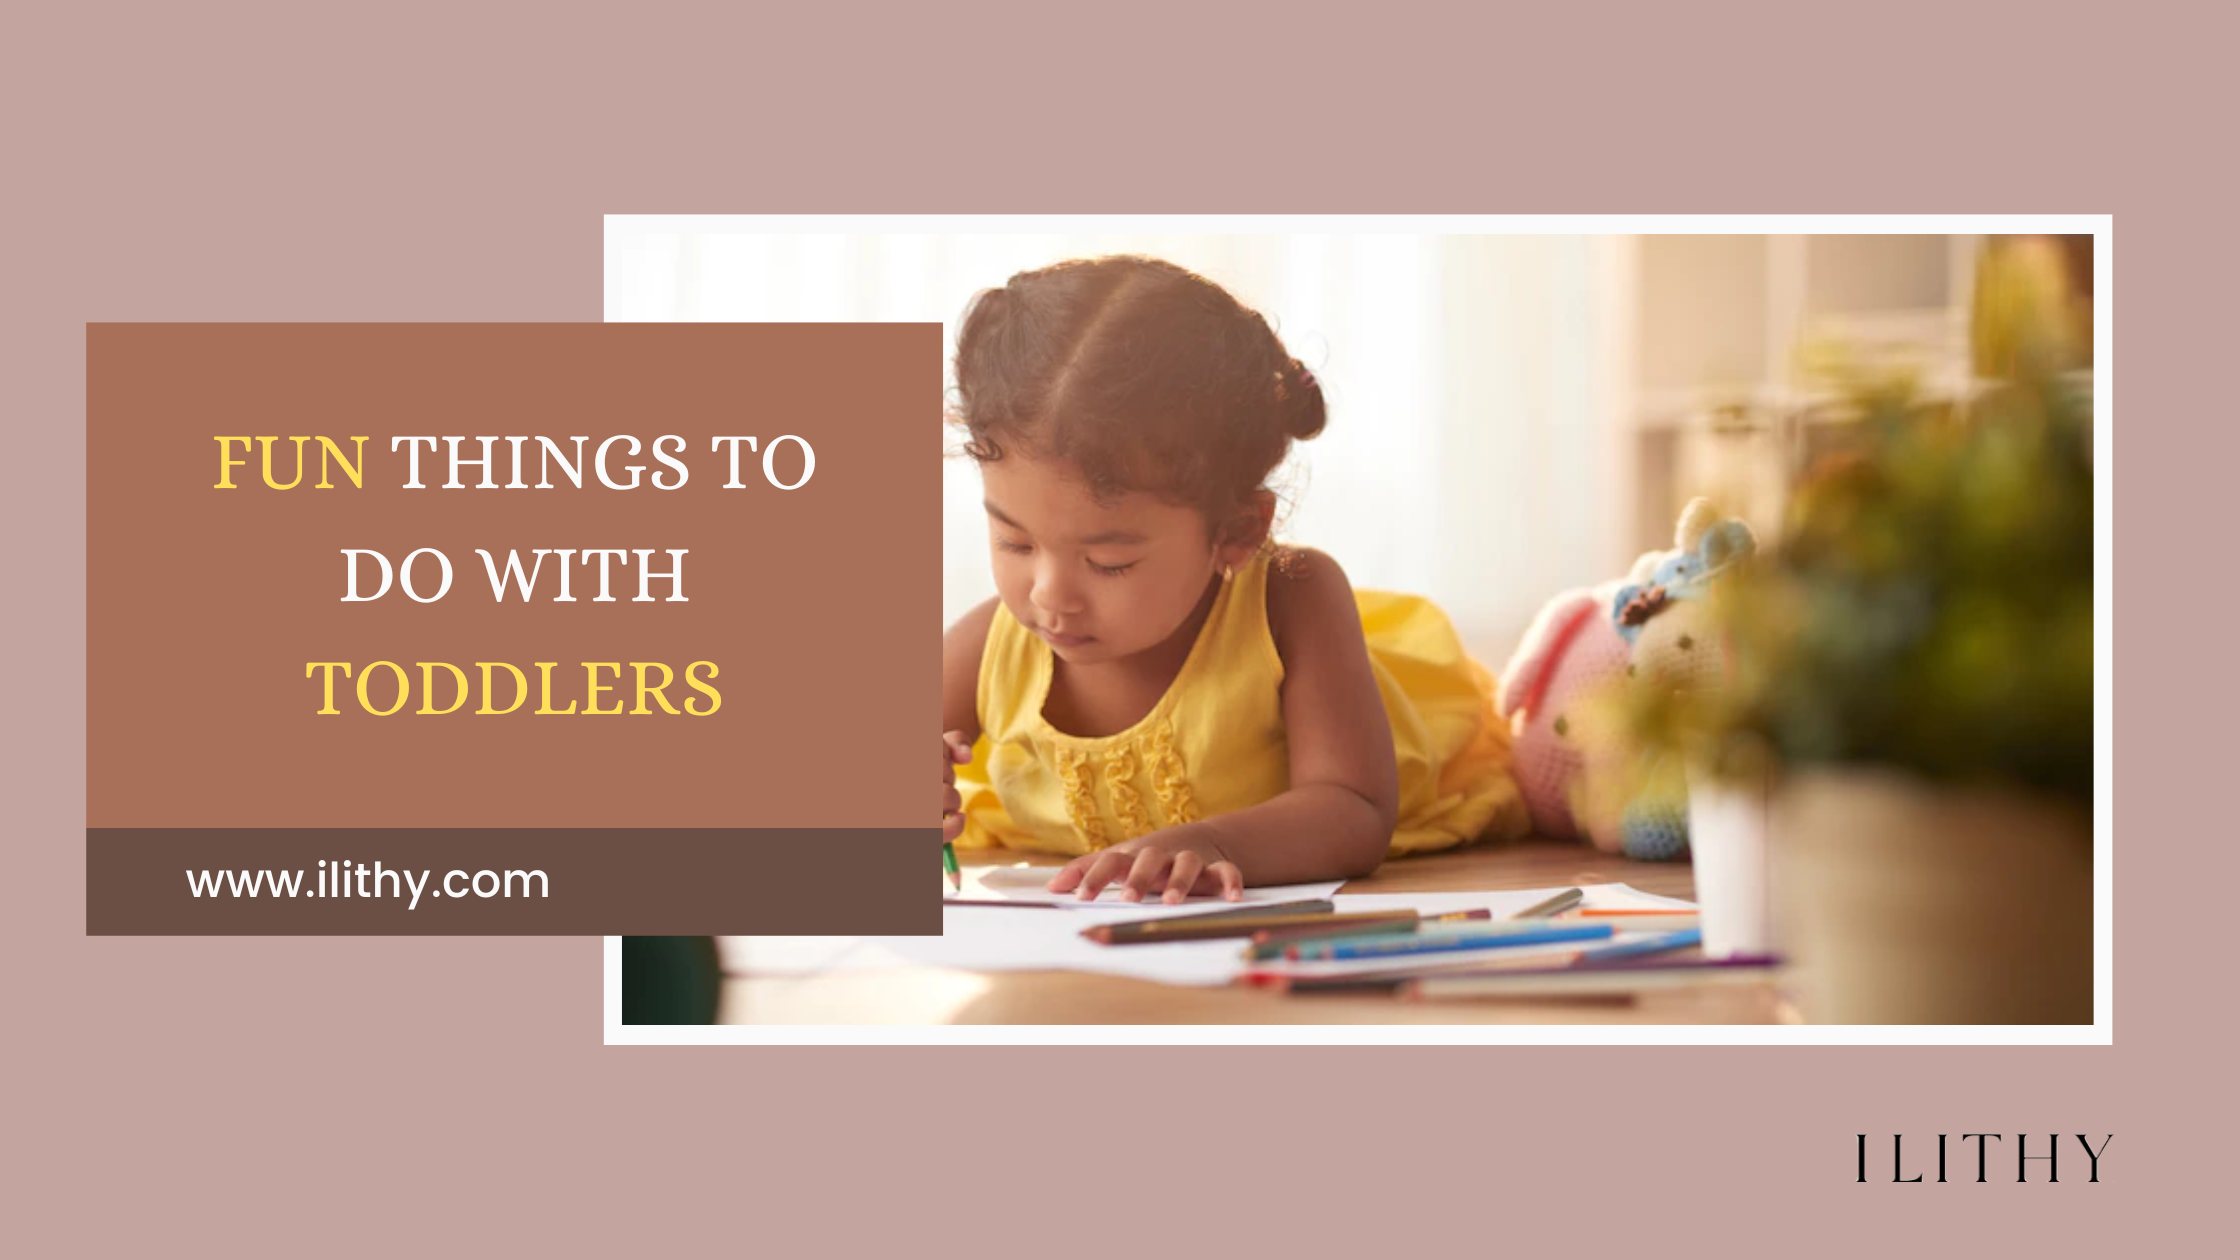 What activities for toddlers are the best? – Ilithy